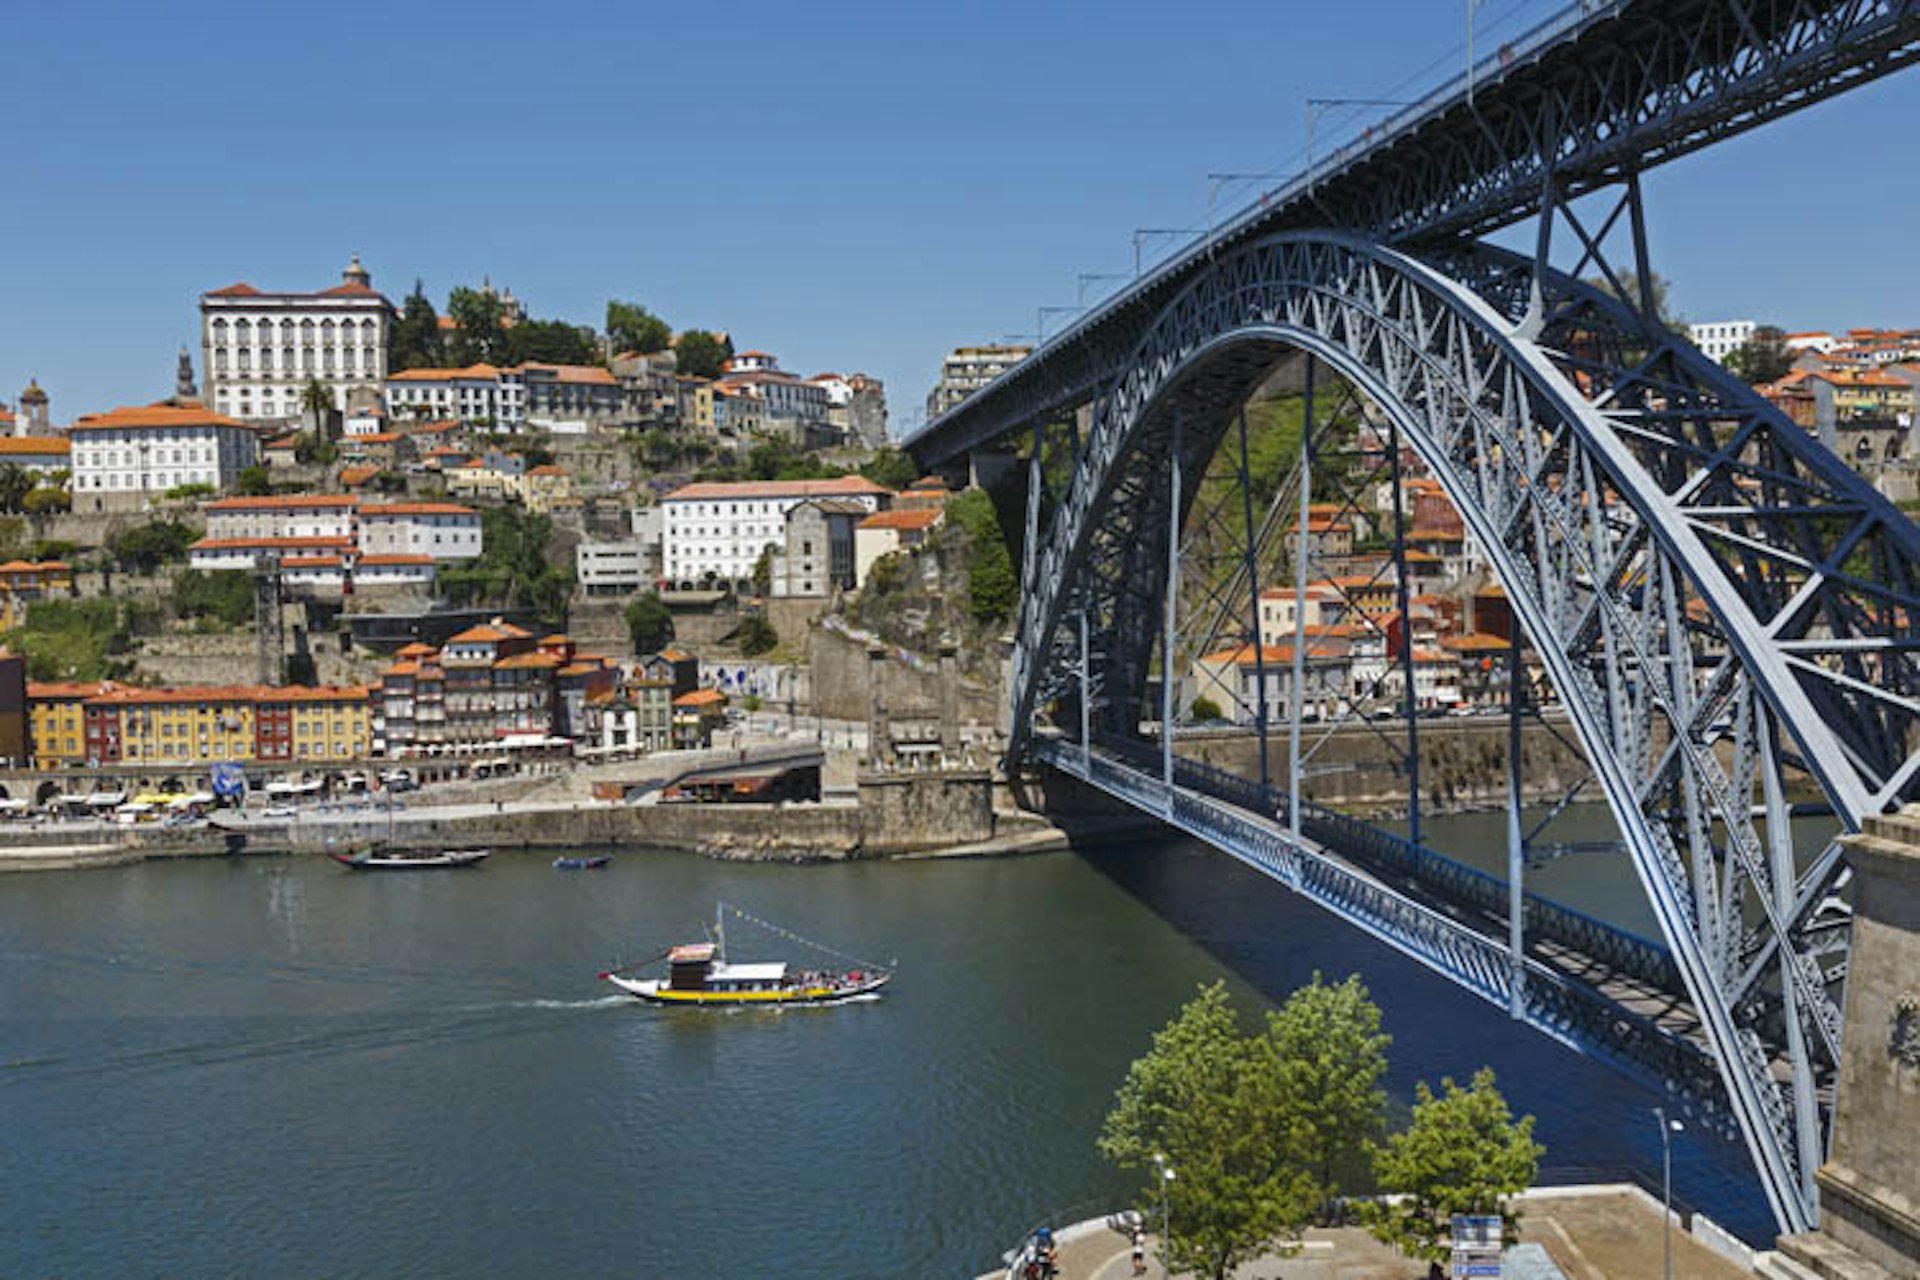 A small yellow boat glides under the metallic Dom Luis I bridge over the Douro River in Porto, Portugal; the far bank has a cluster of white and yellow blocks of flats.